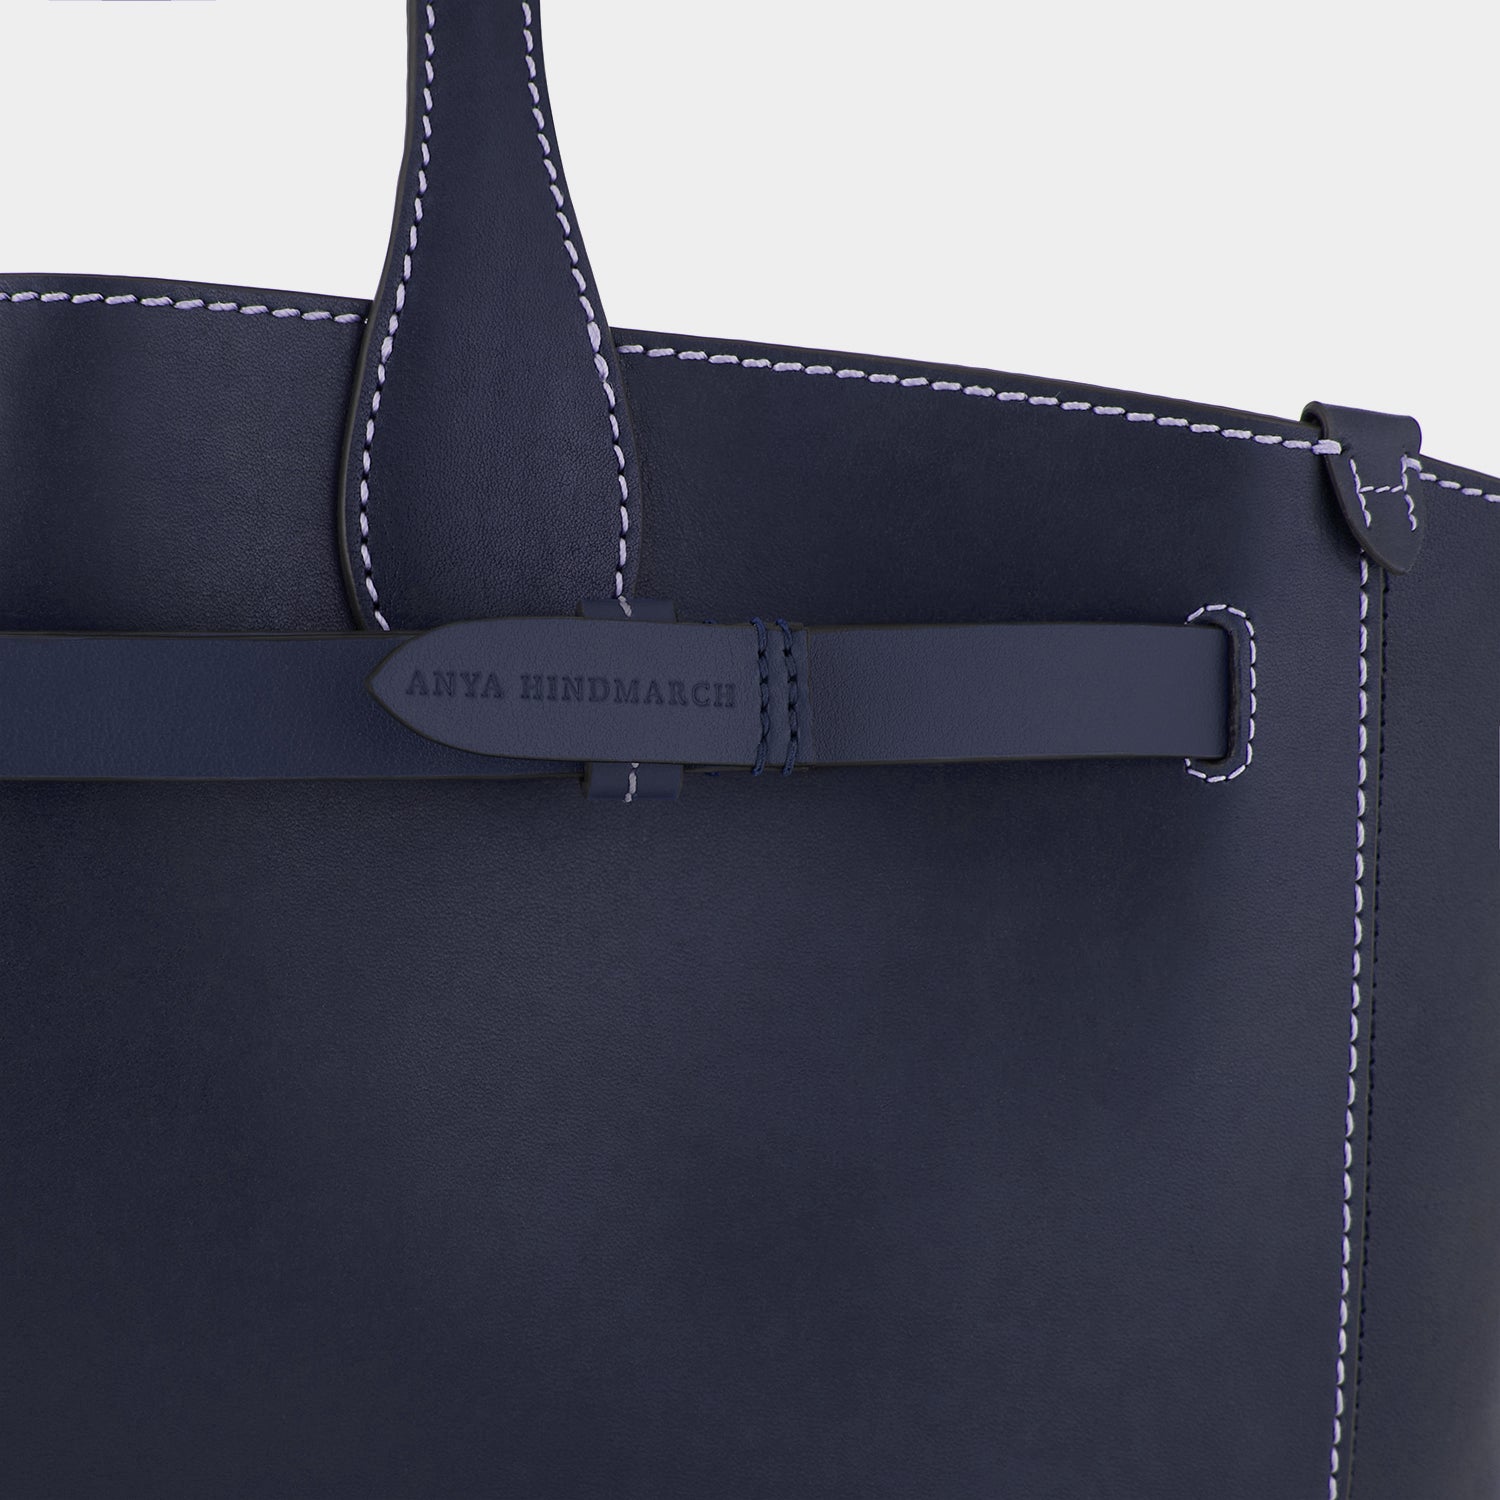 「Return to Nature」 トート -

                  
                    Compostable Leather in Marine -
                  

                  Anya Hindmarch JP
